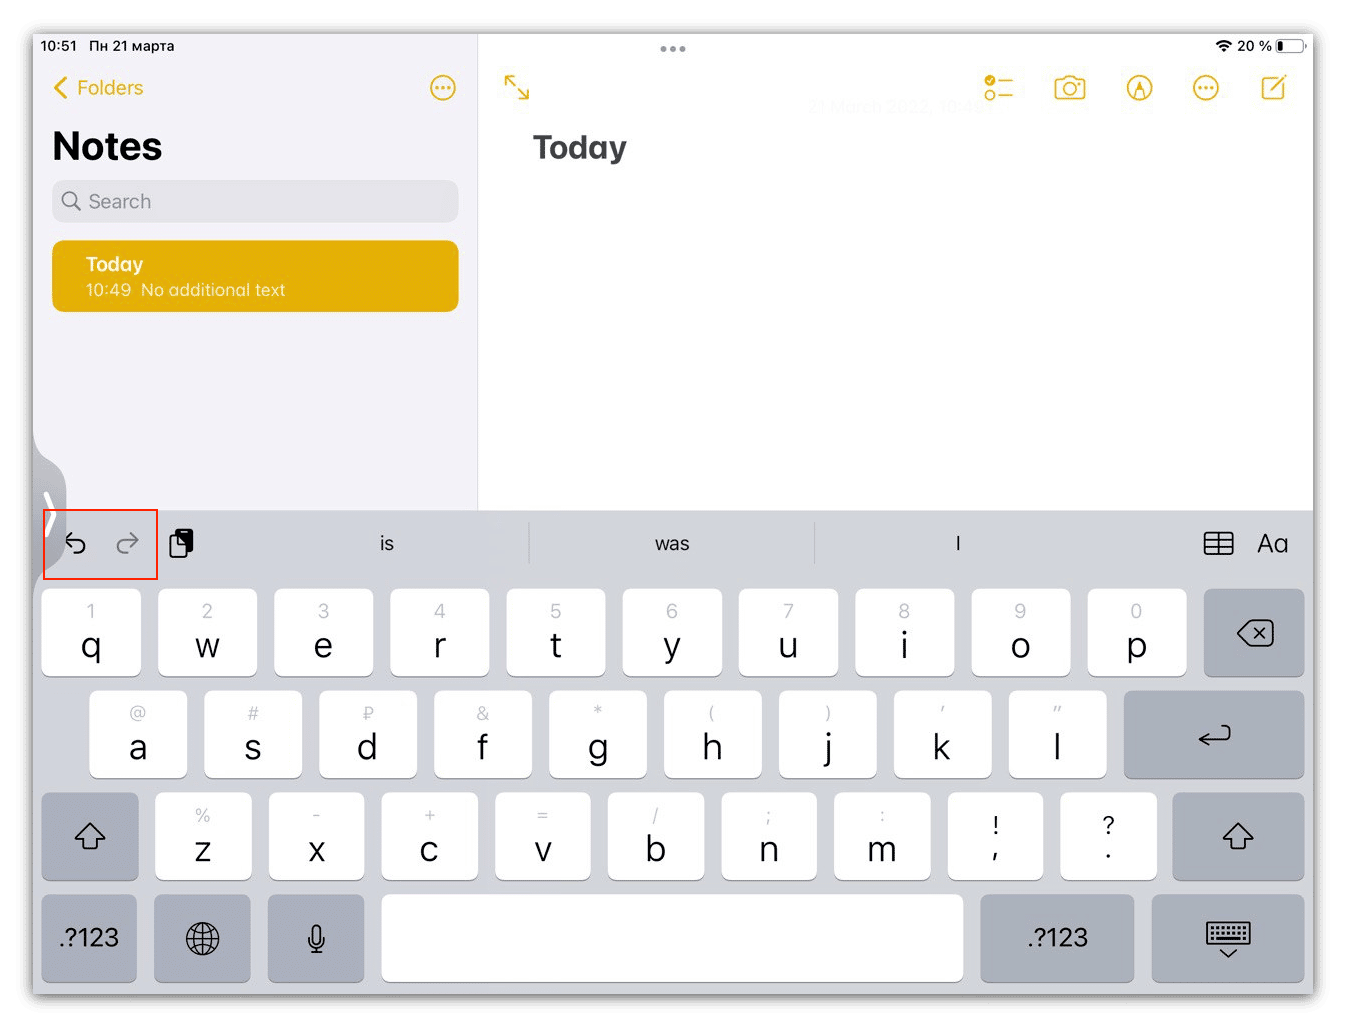 iPad screen showing undo and redo buttons in Notes